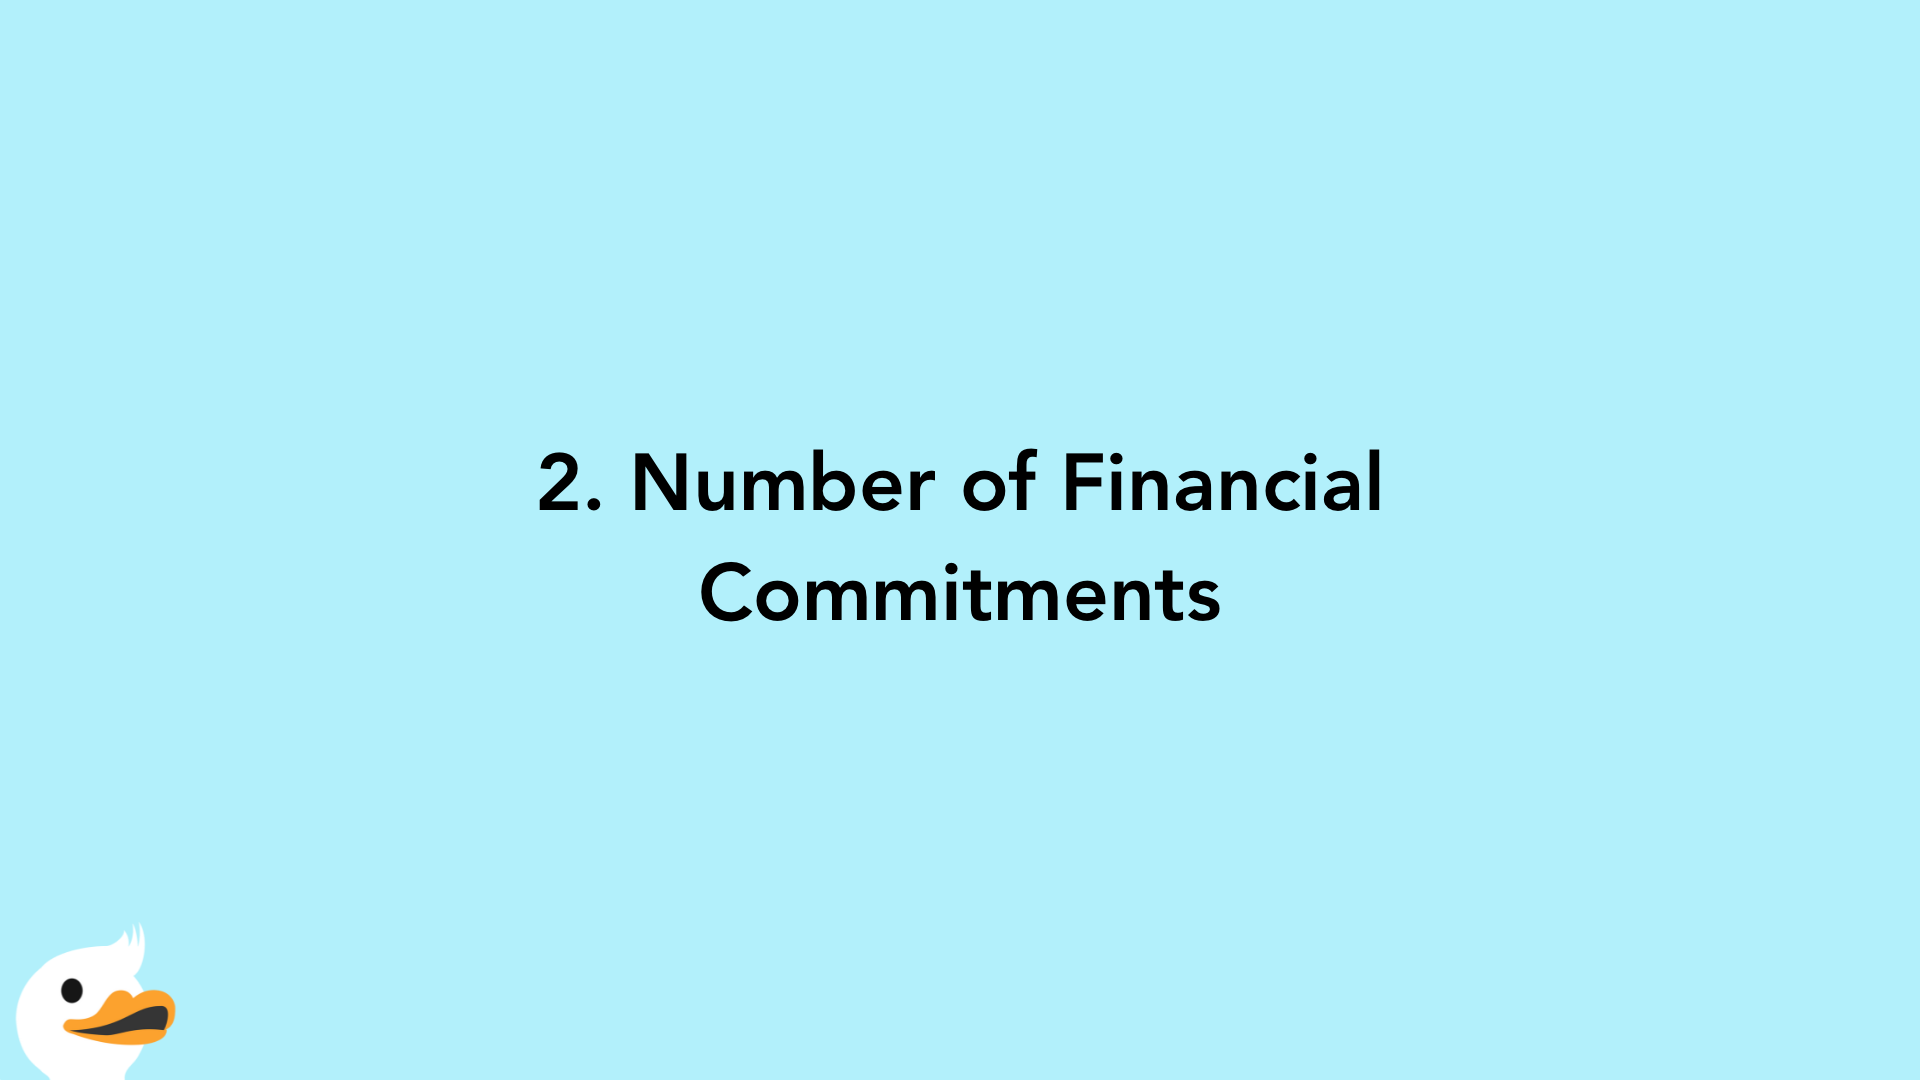 2. Number of Financial Commitments